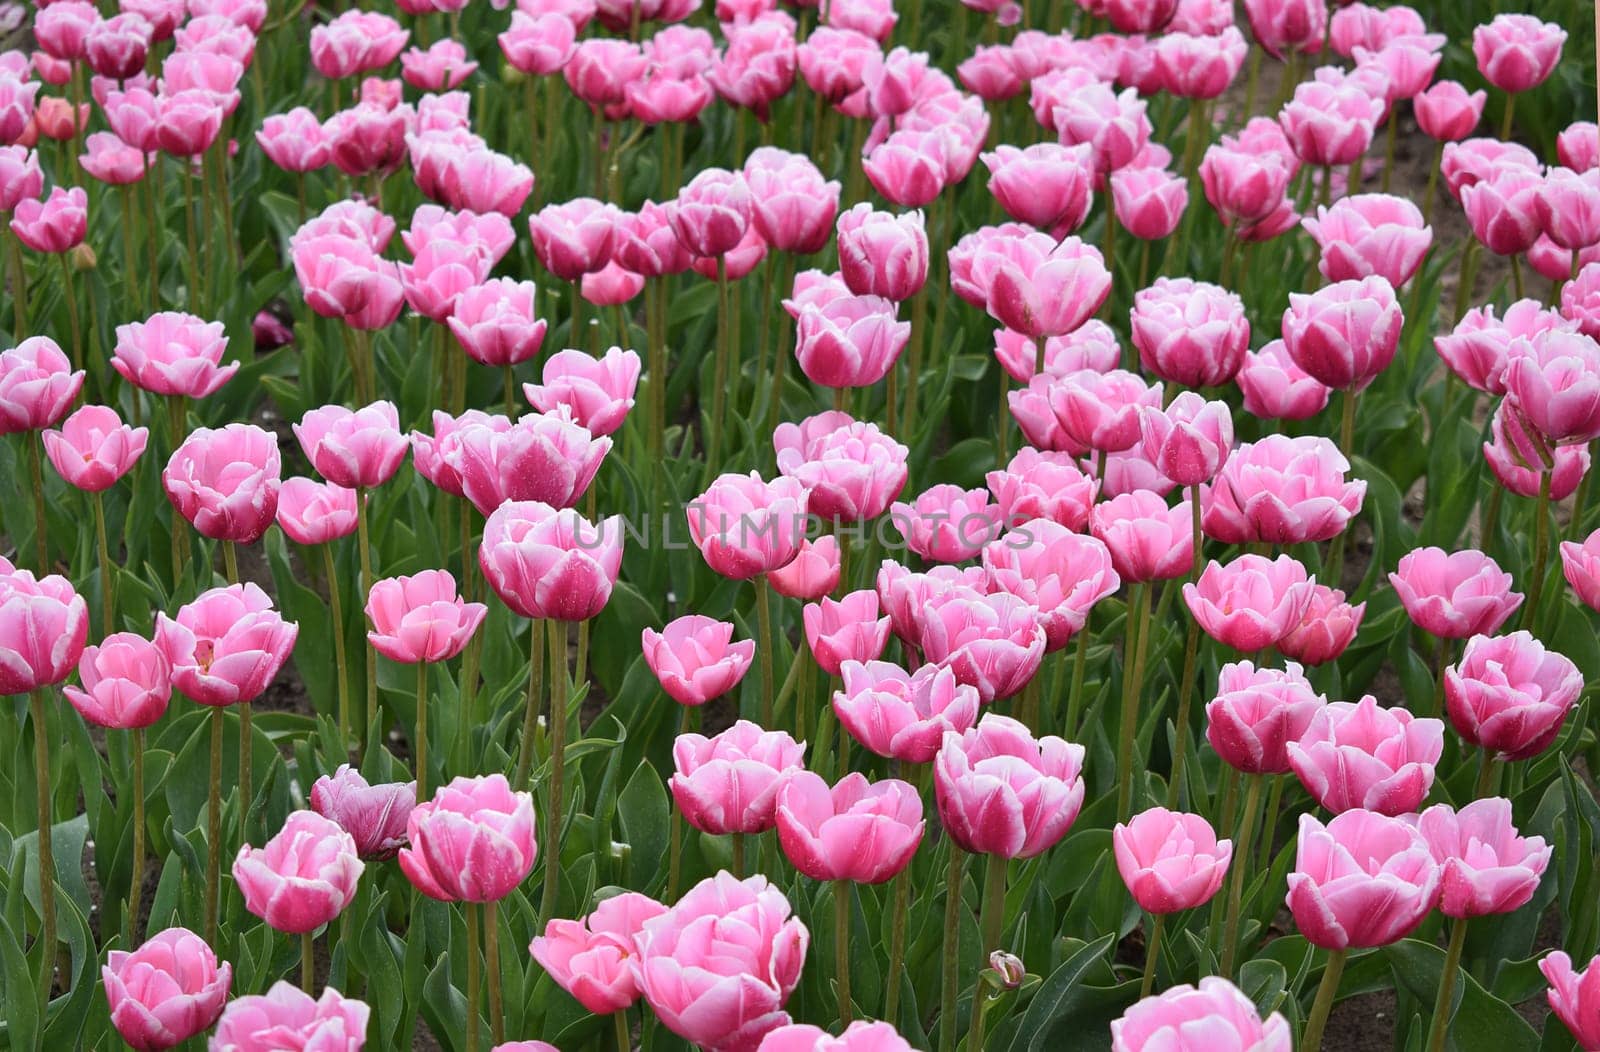 Field with beautiful pink tulips. High quality photo